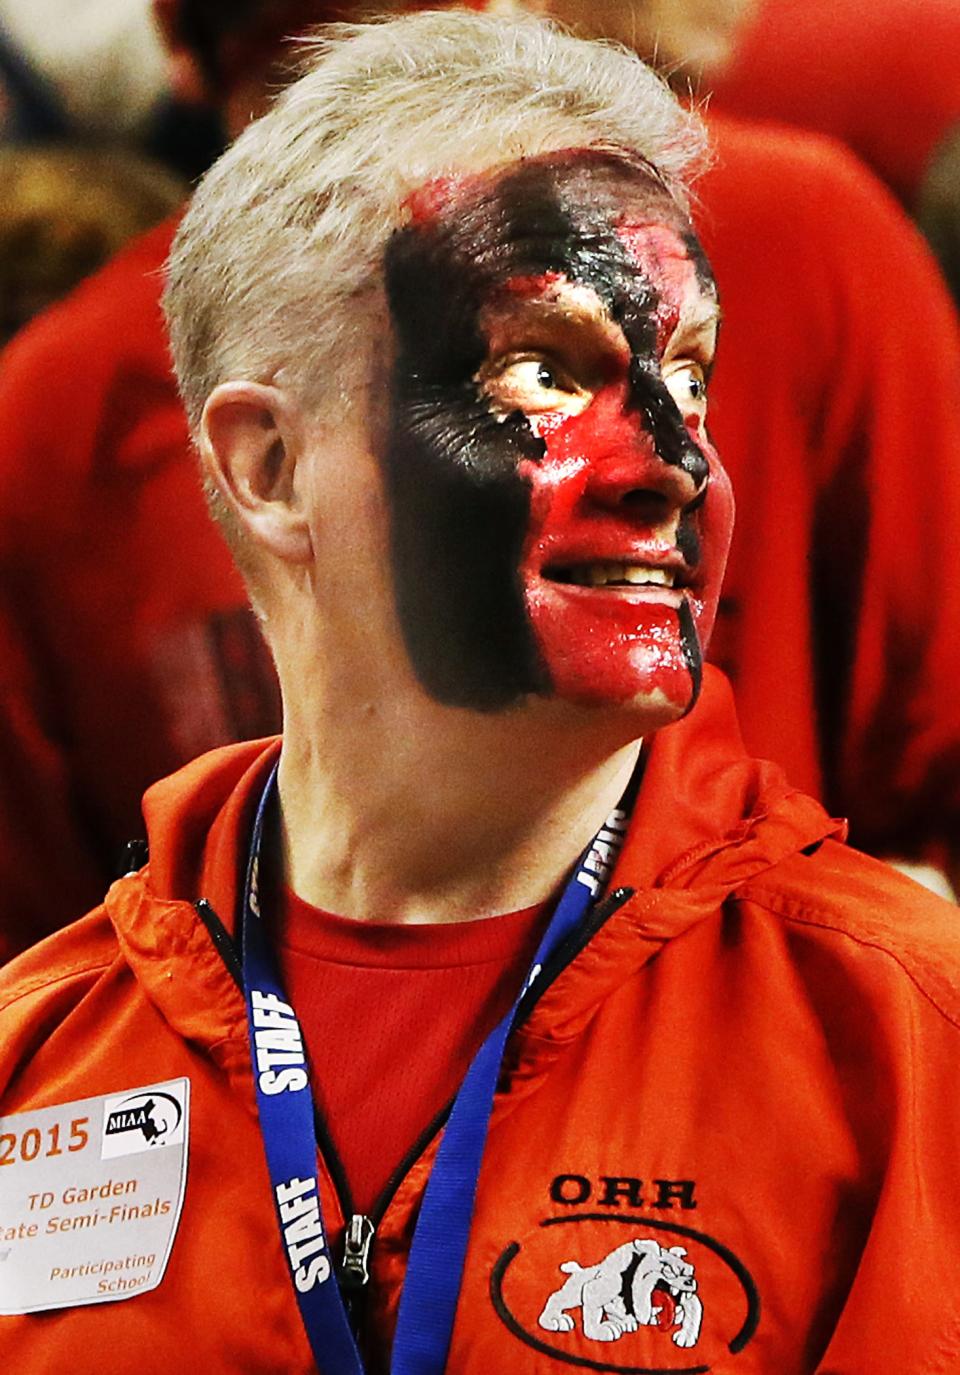 Old Rochester athletic director Bill Tilden got a Bulldog "paint job" at half-time to help bring home the Old Rochester victory over Pentucket.